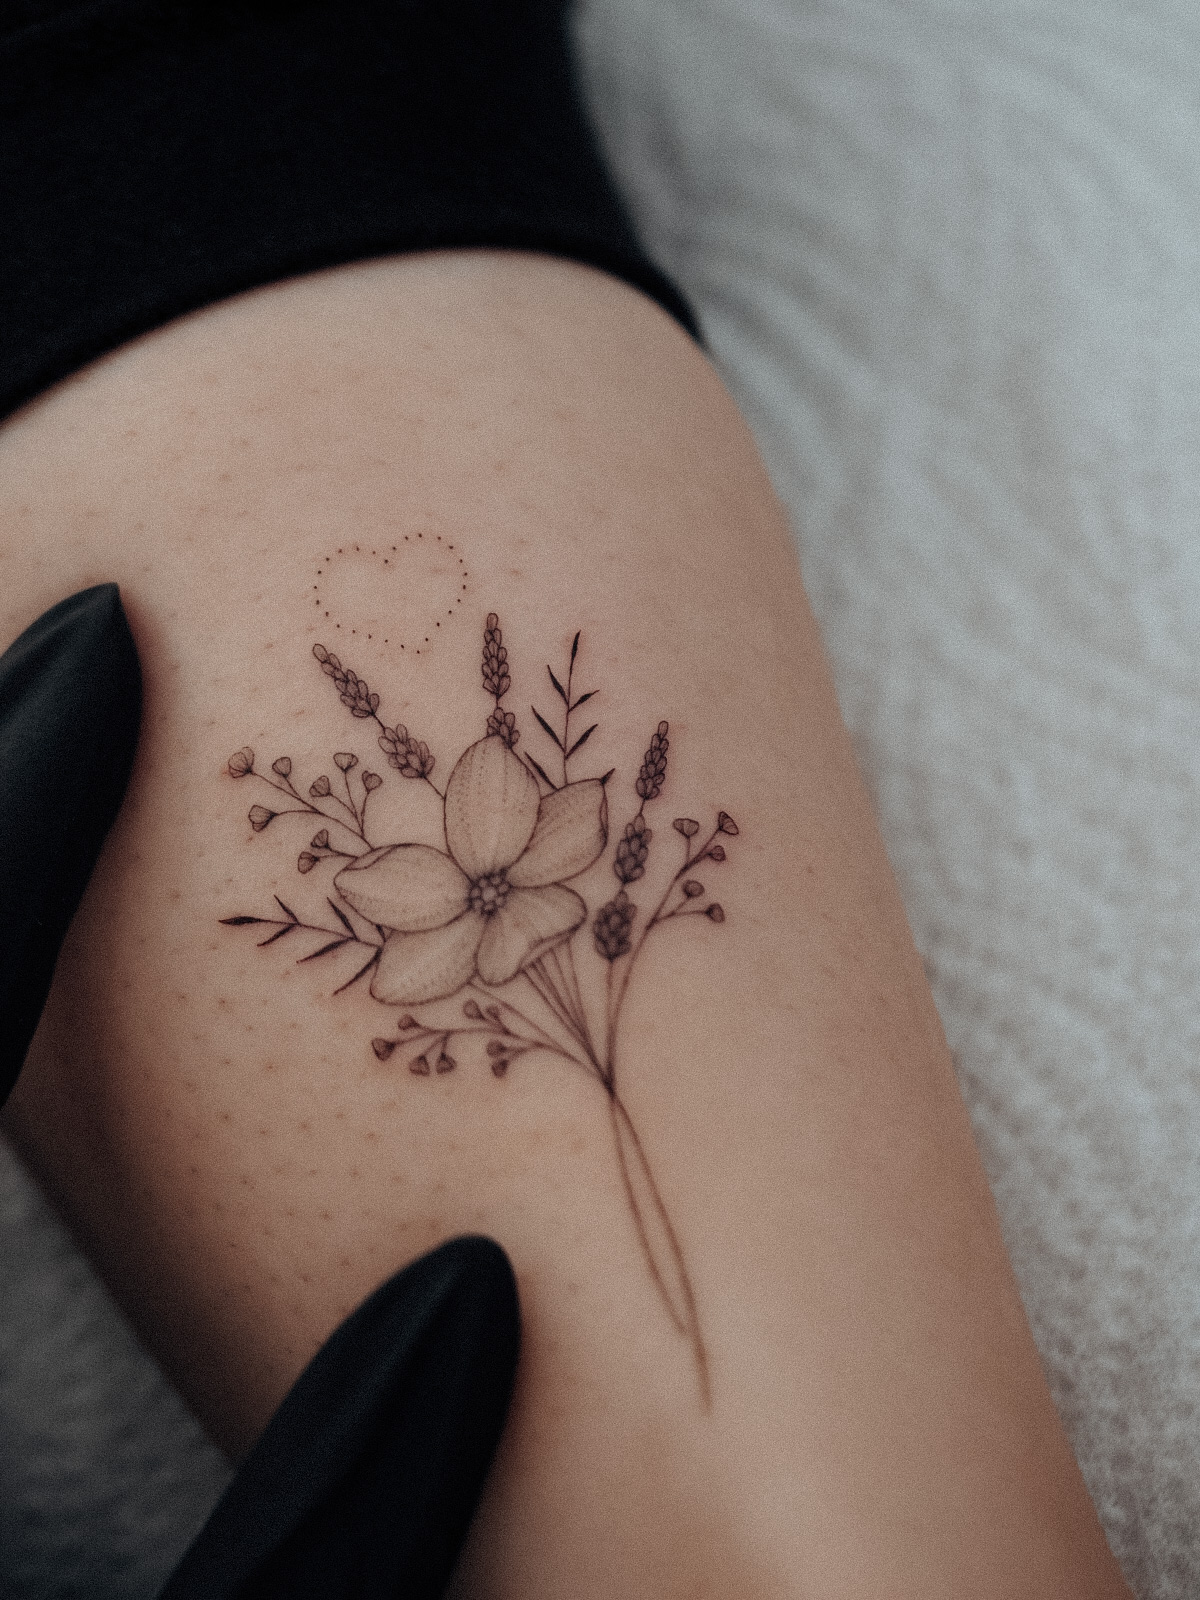 Forget me not love bouquet tattoo by Alina BUNAMI INK